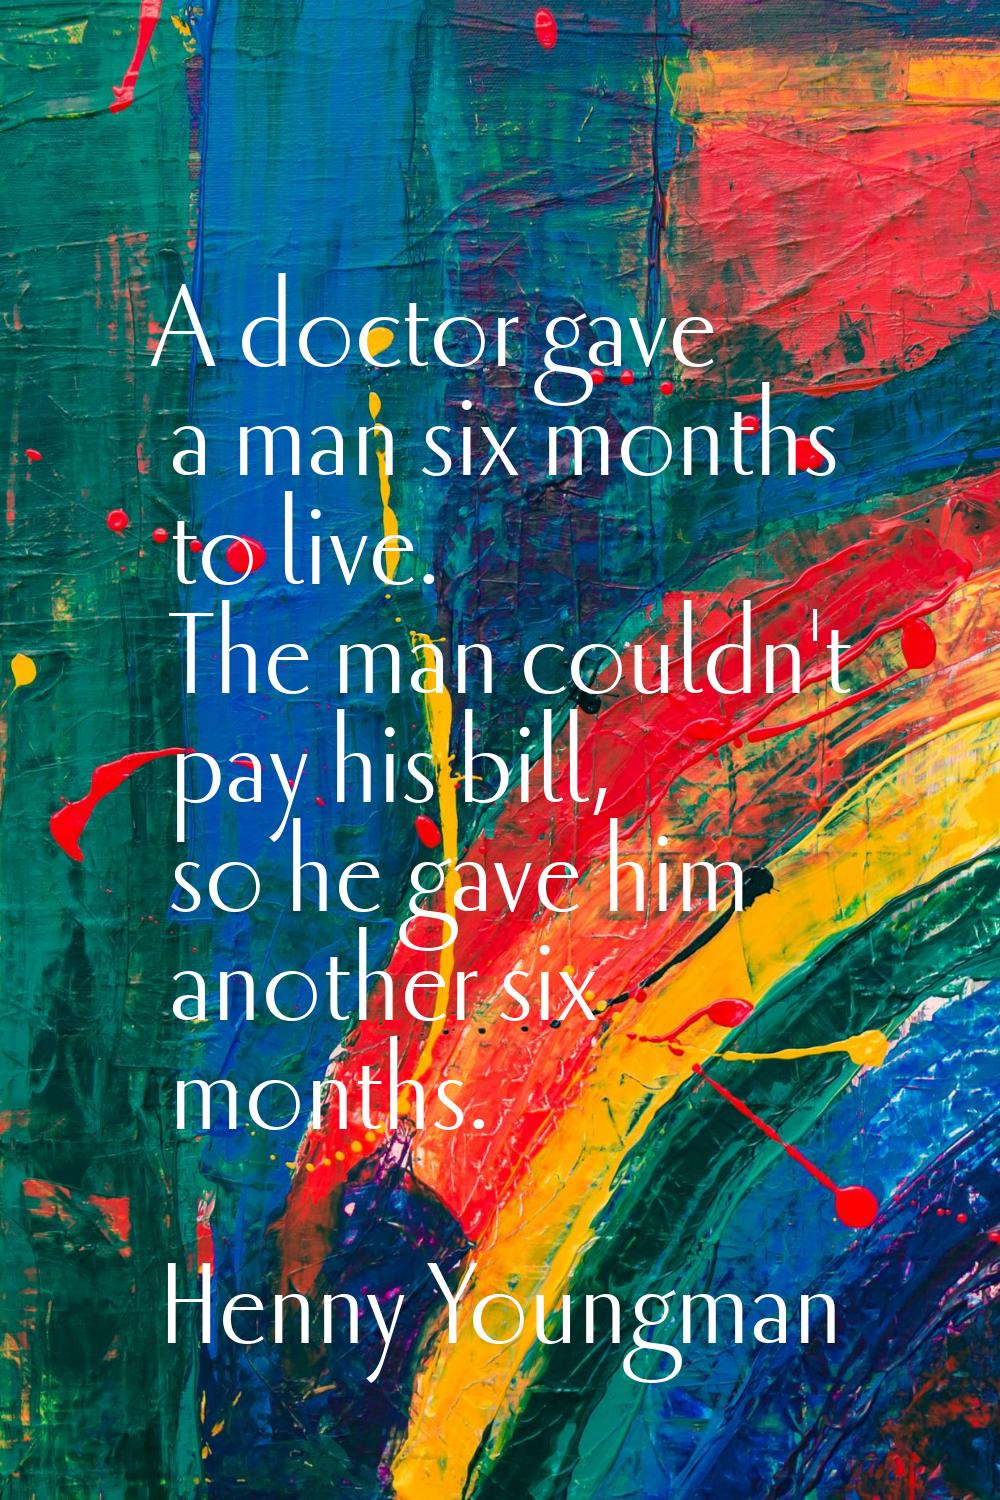 A doctor gave a man six months to live. The man couldn't pay his bill, so he gave him another six m